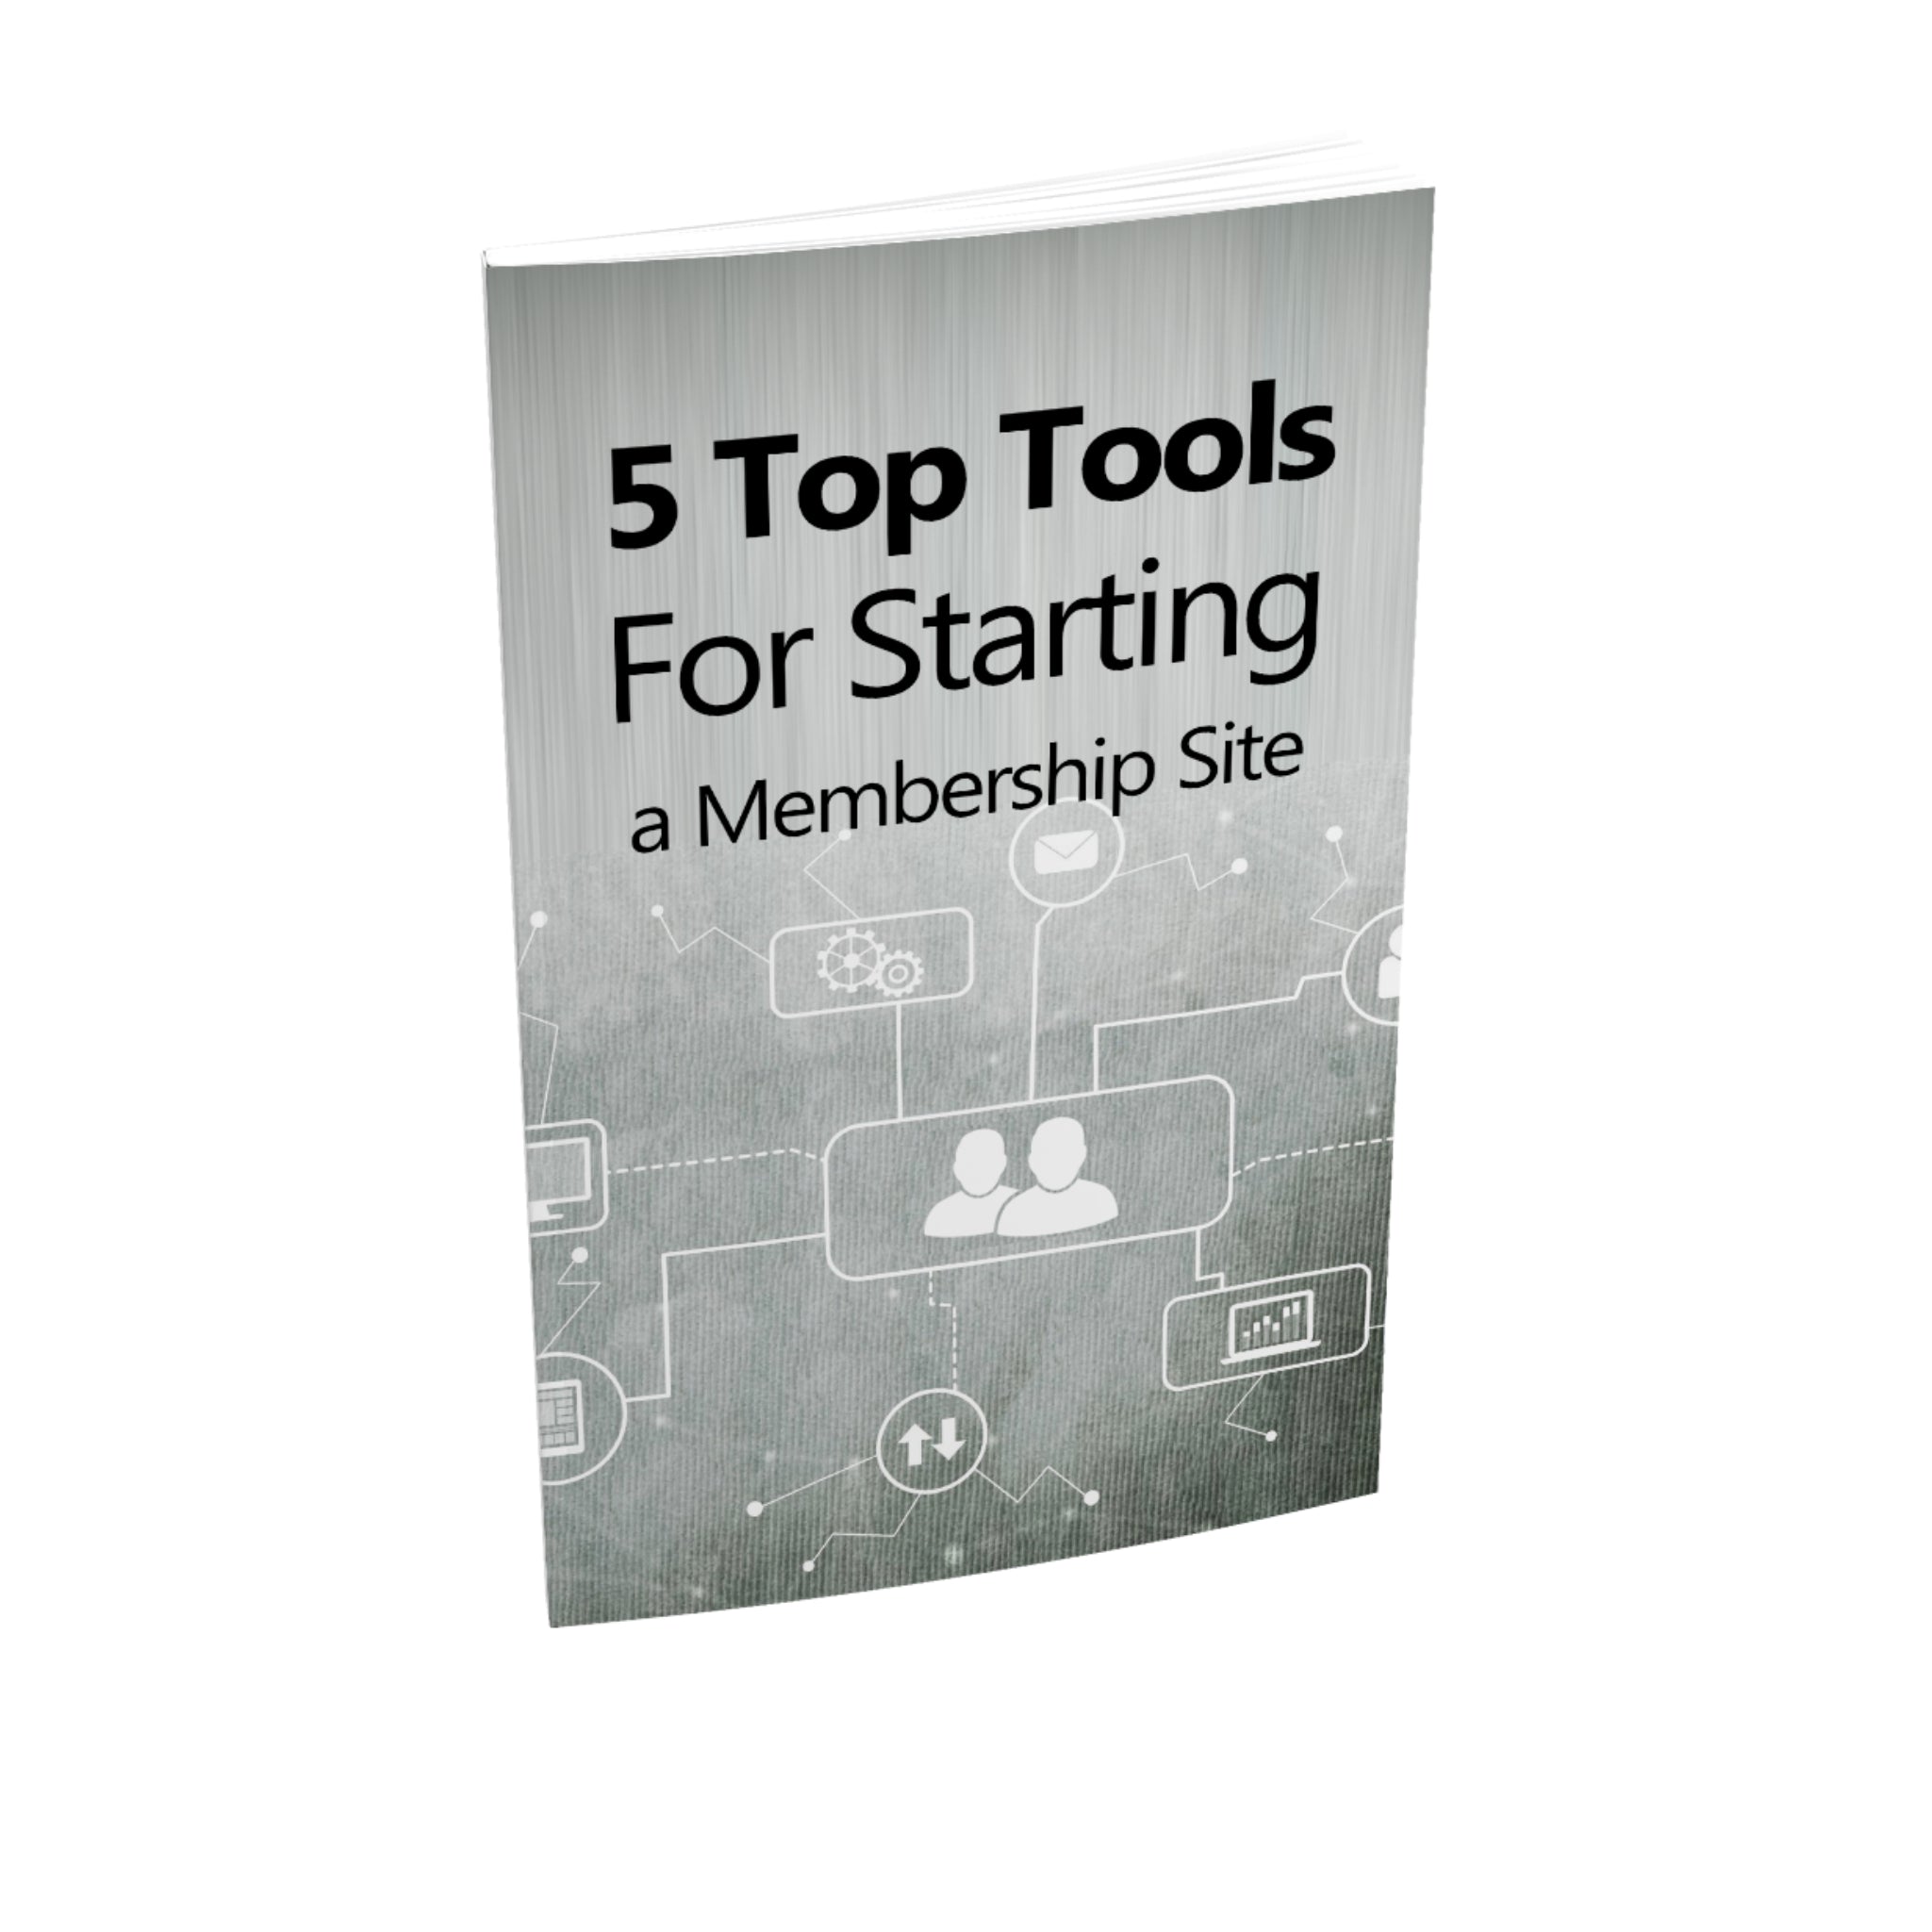 5 Top Tools For Starting a Membership Site Ebook